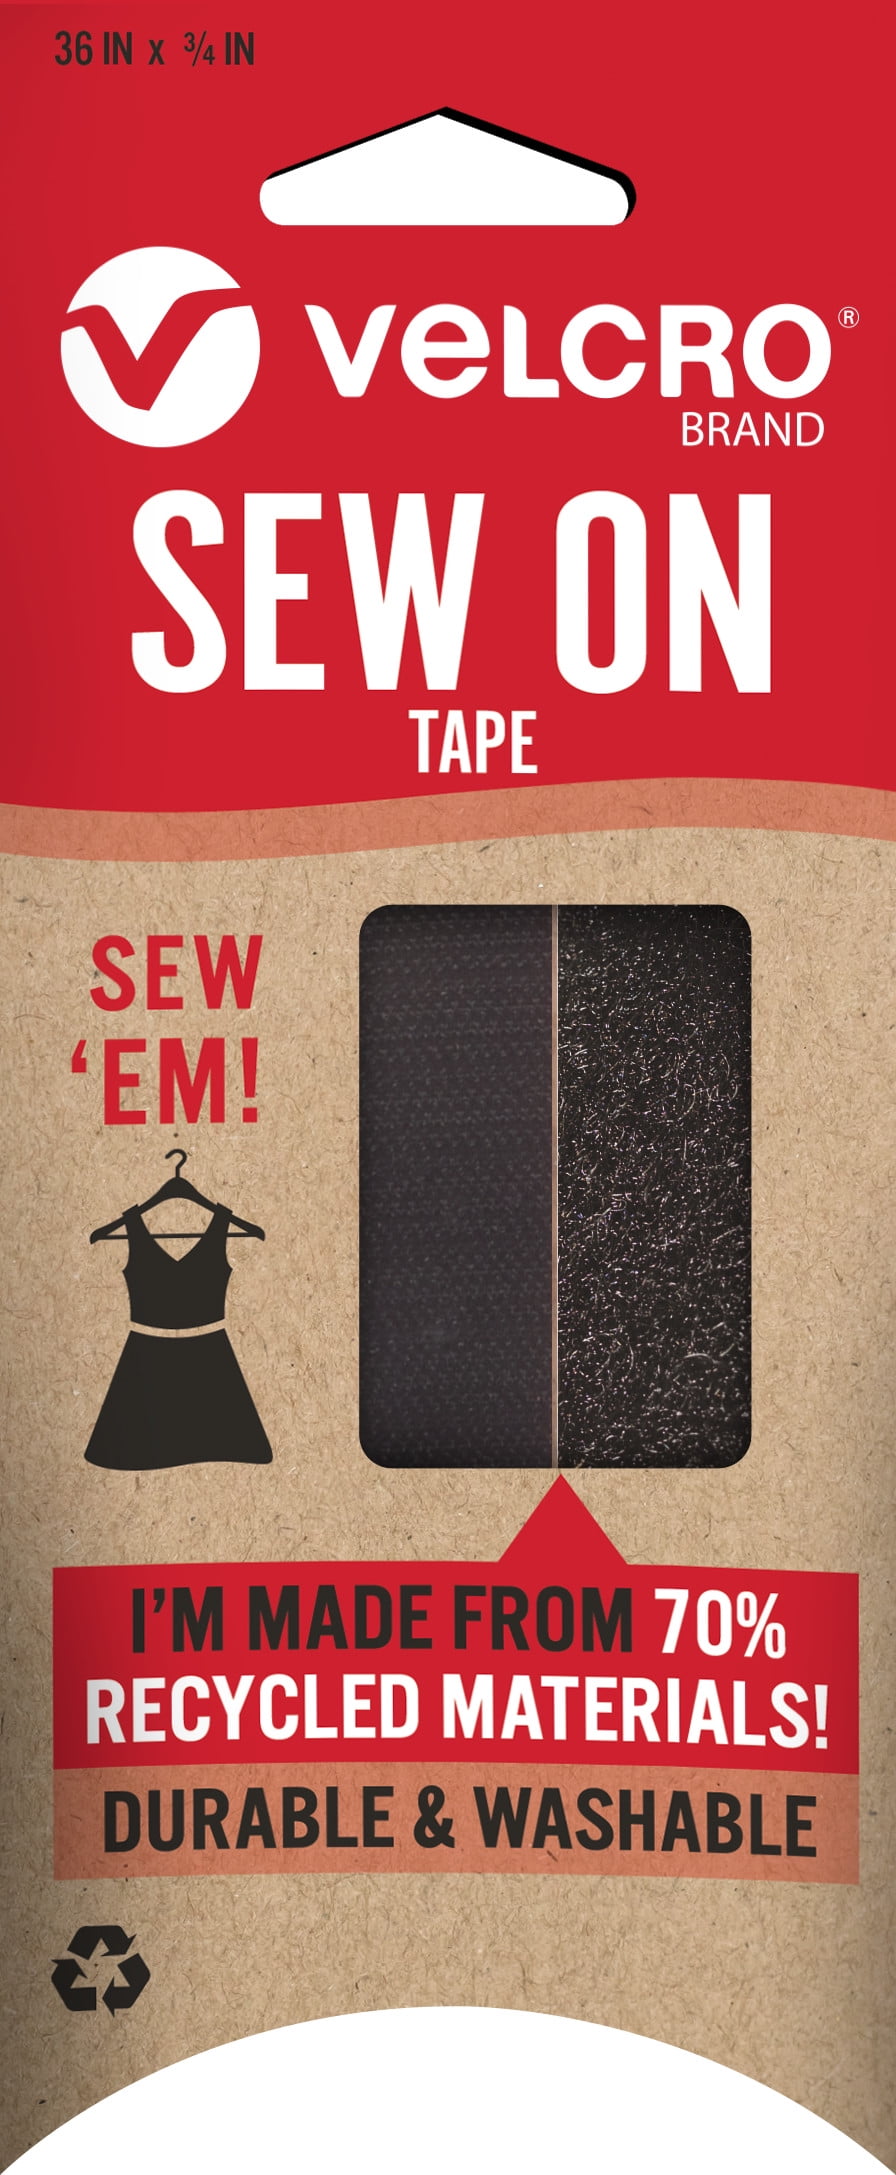 VELCRO Brand ECO Collection Sew On Tape 36in x 3/4in, Sustainable 70% Recycled Materials, Durable and Washable, Black